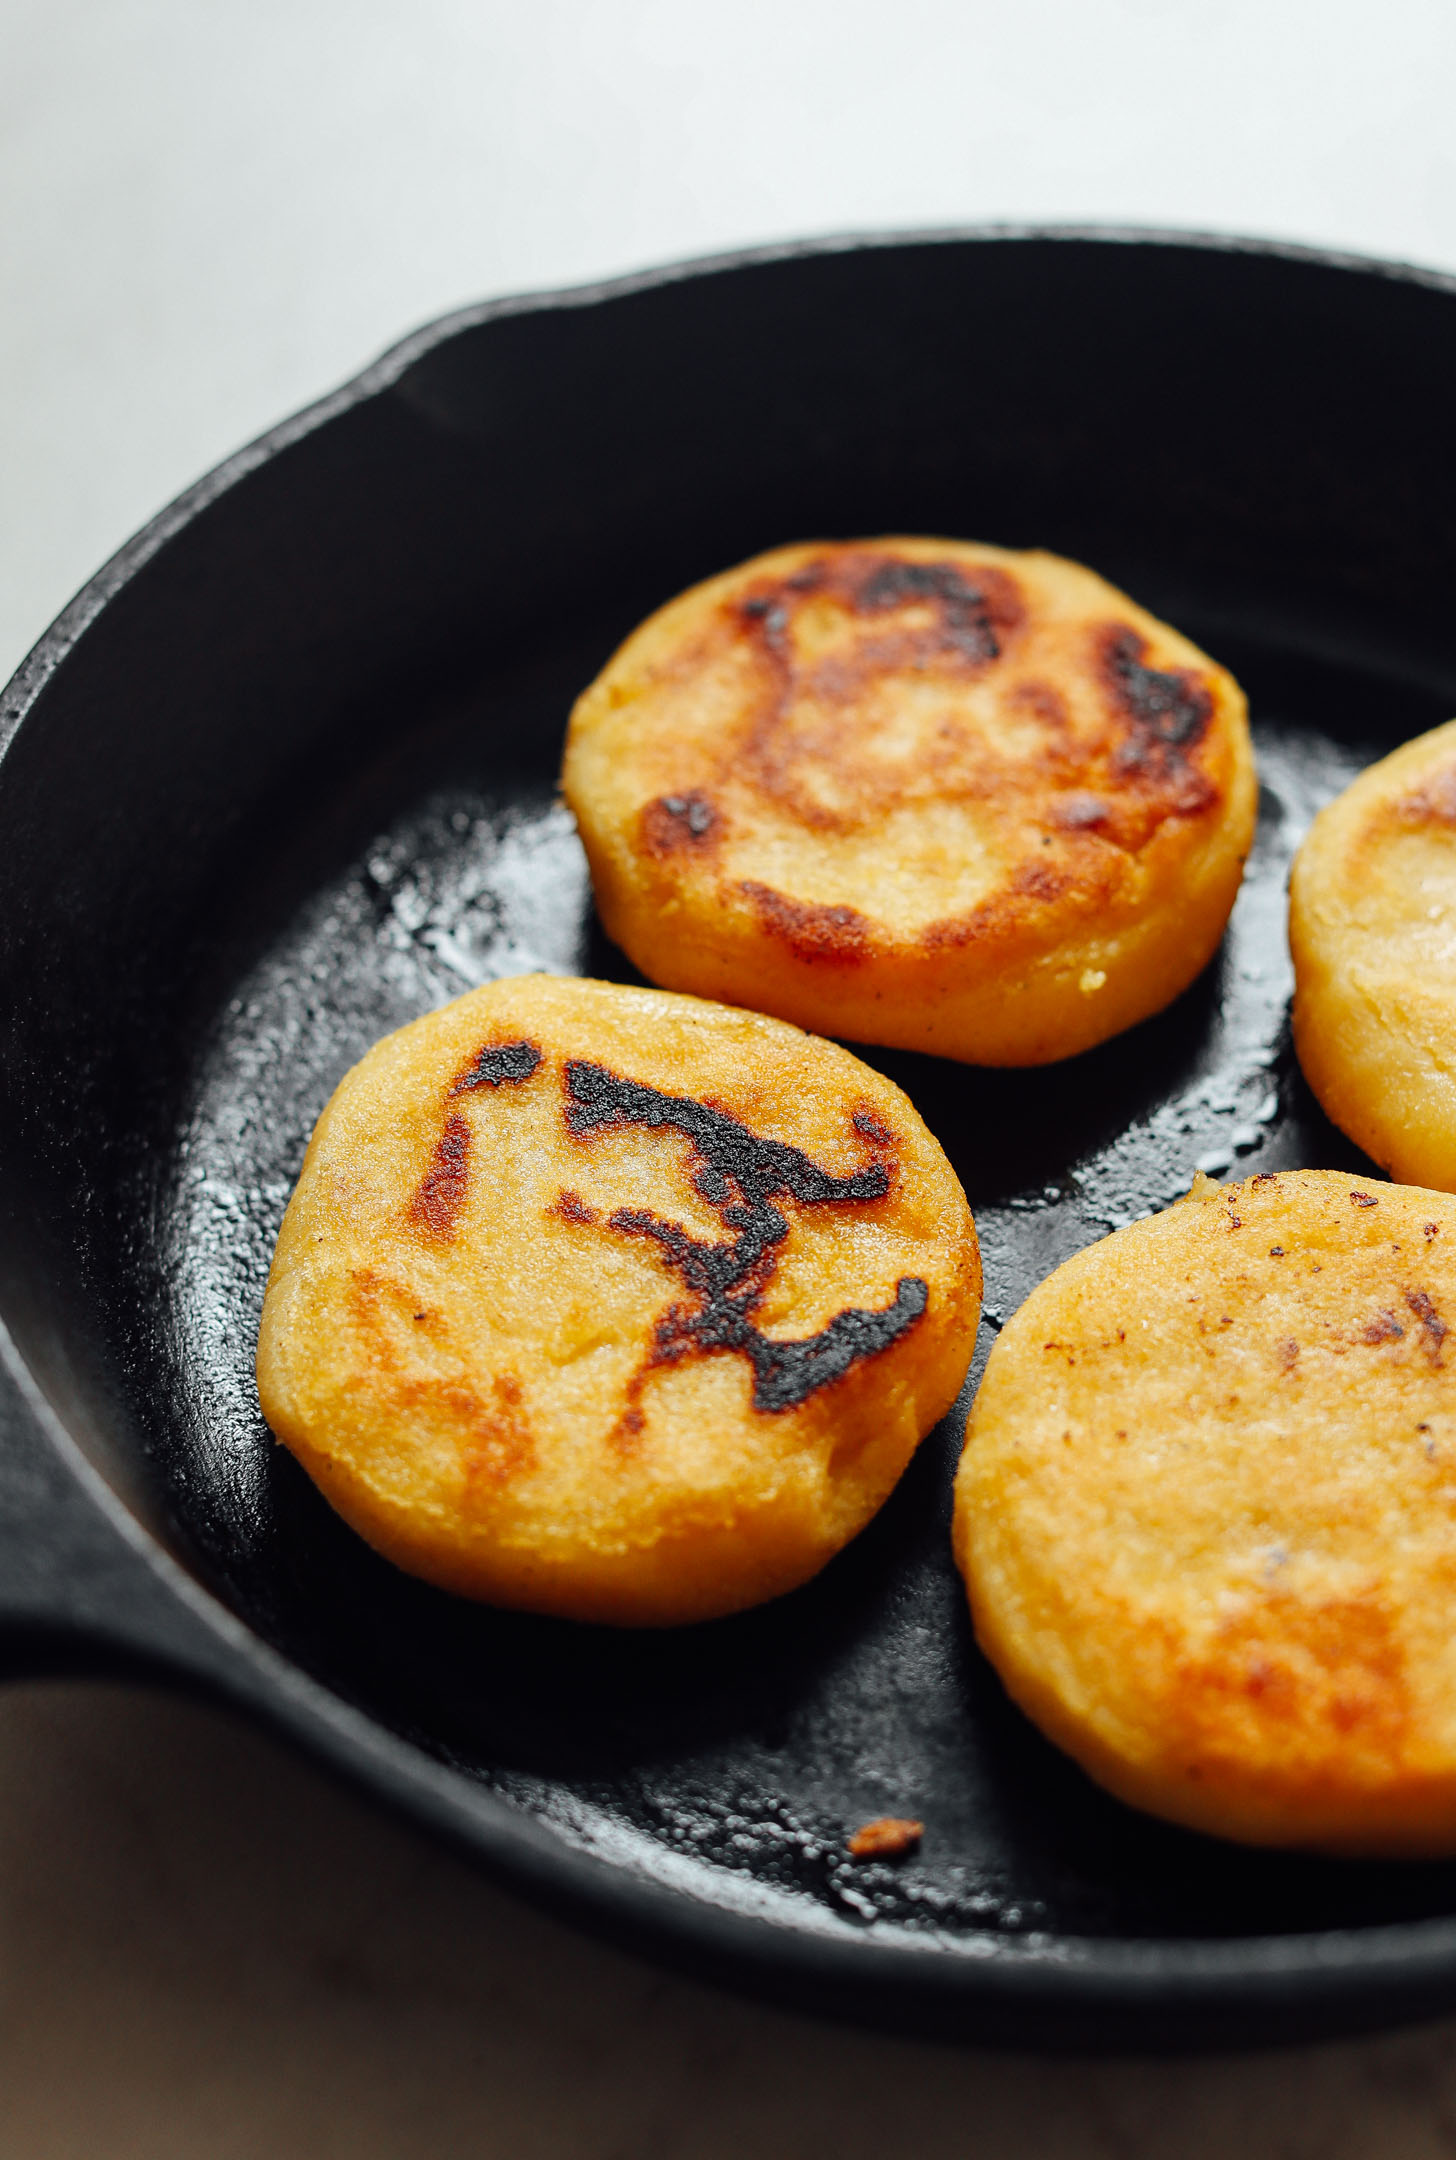 Cooking homemade gluten-free Arepas in a cast-iron skillet